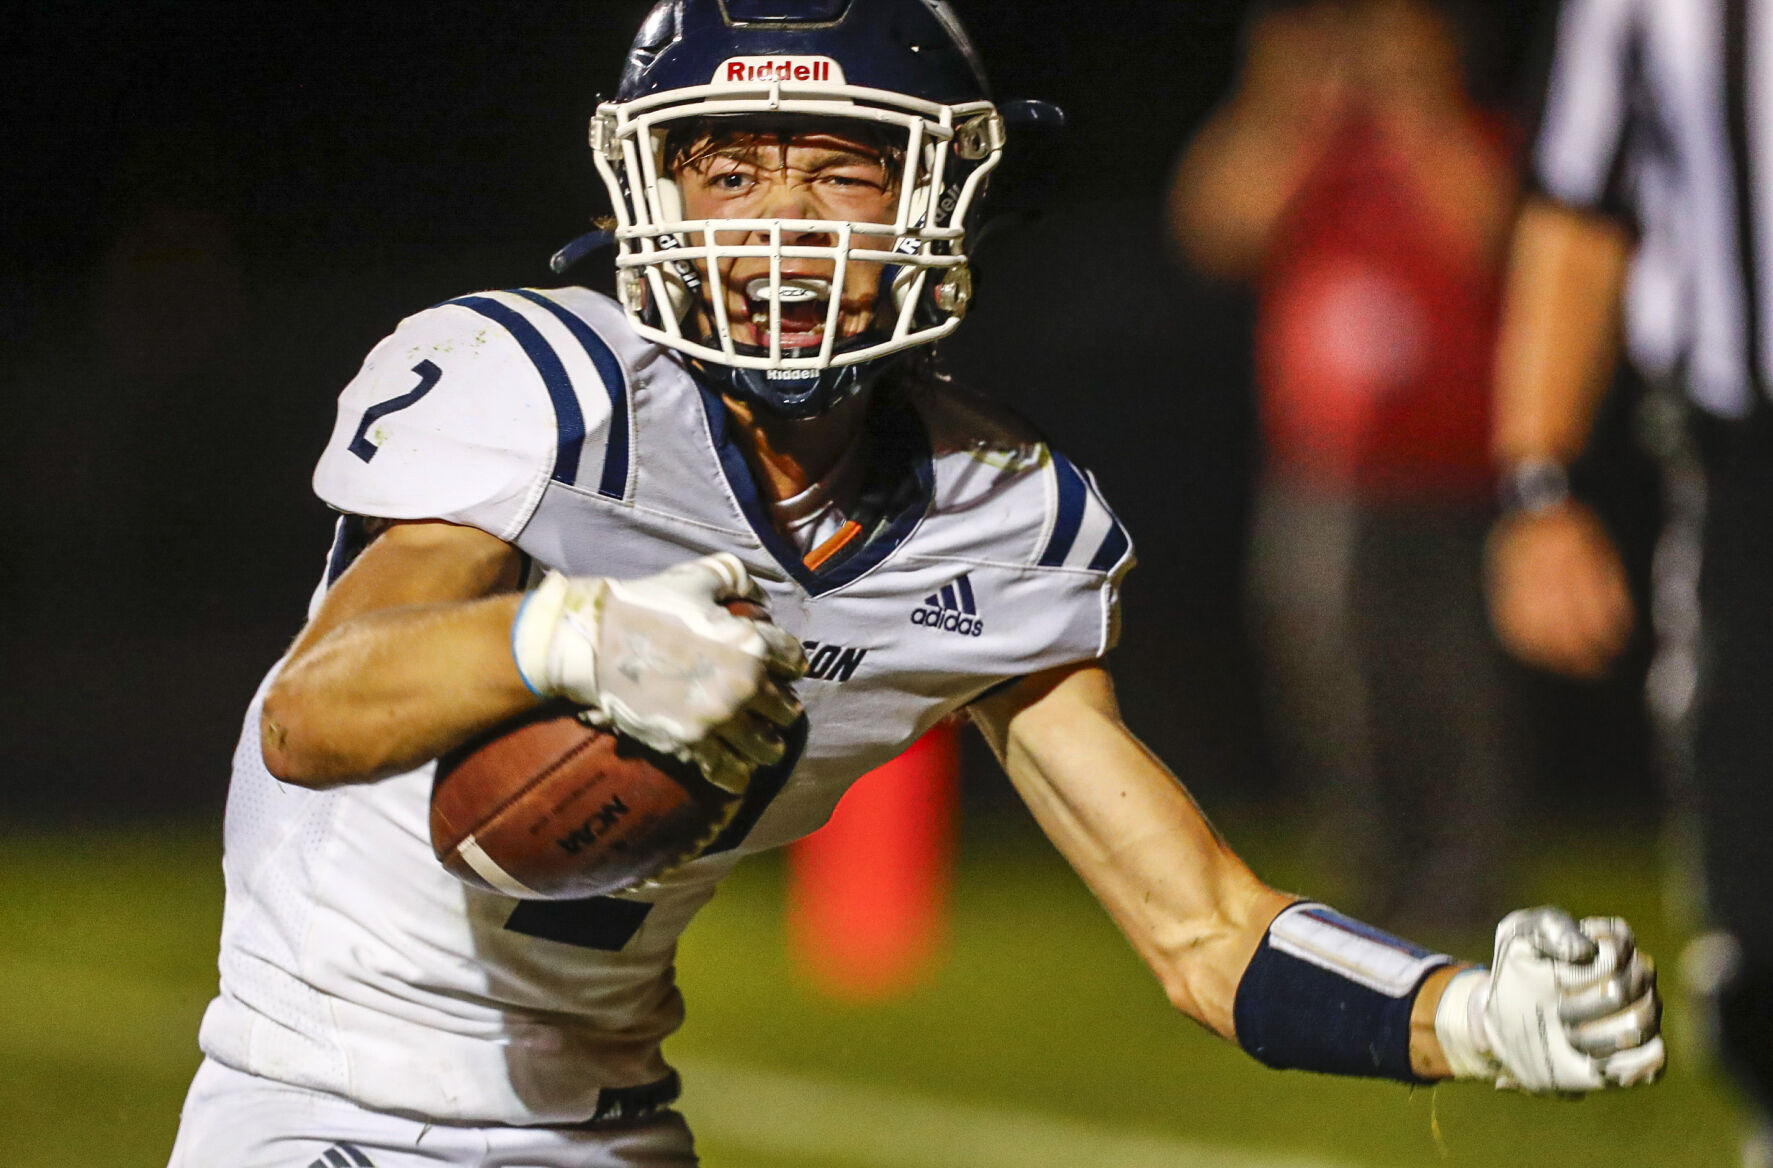 Hudson stages thrilling comeback to beat Jesup with last-minute touchdown